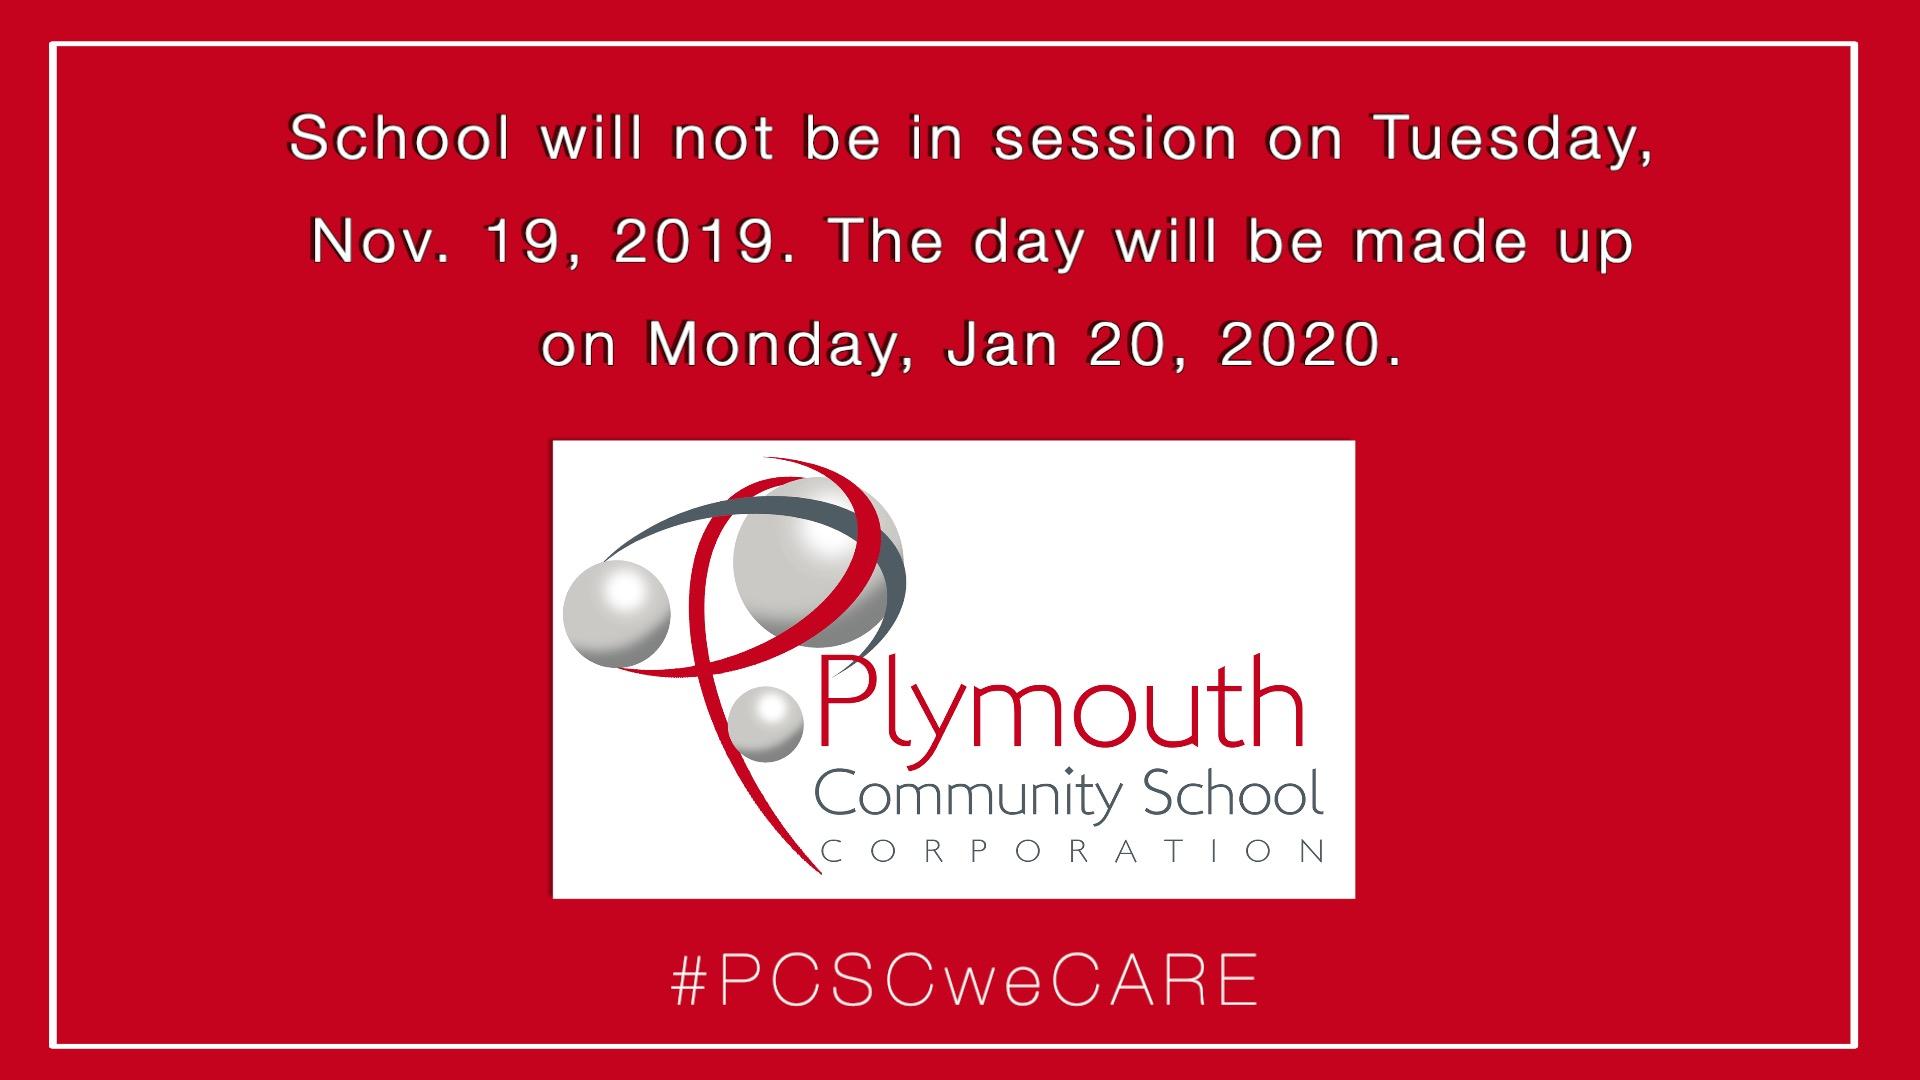 School will not be in session on Tuesday, Nov. 19, 2019. The day will be made up on Monday, Jan. 20, 2020. PCSC logo and #PCSCweCARE